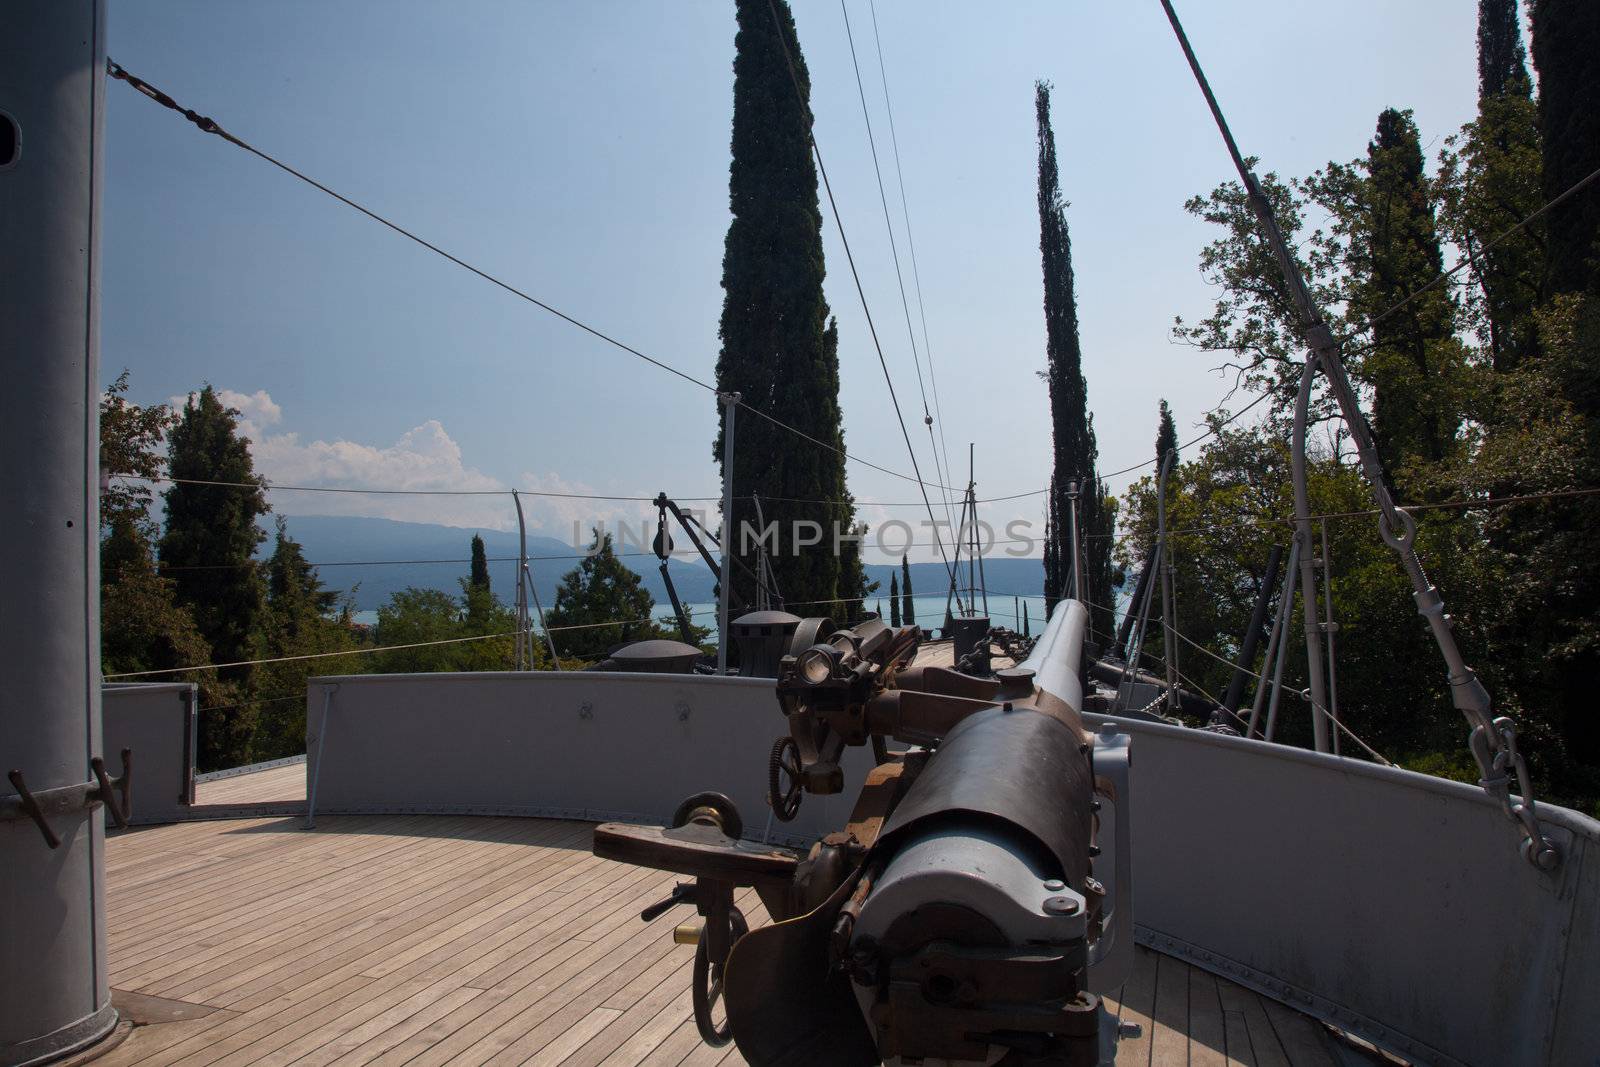 Gun deck on the Puglia warship that is installed in the mountainside on Lake Garda